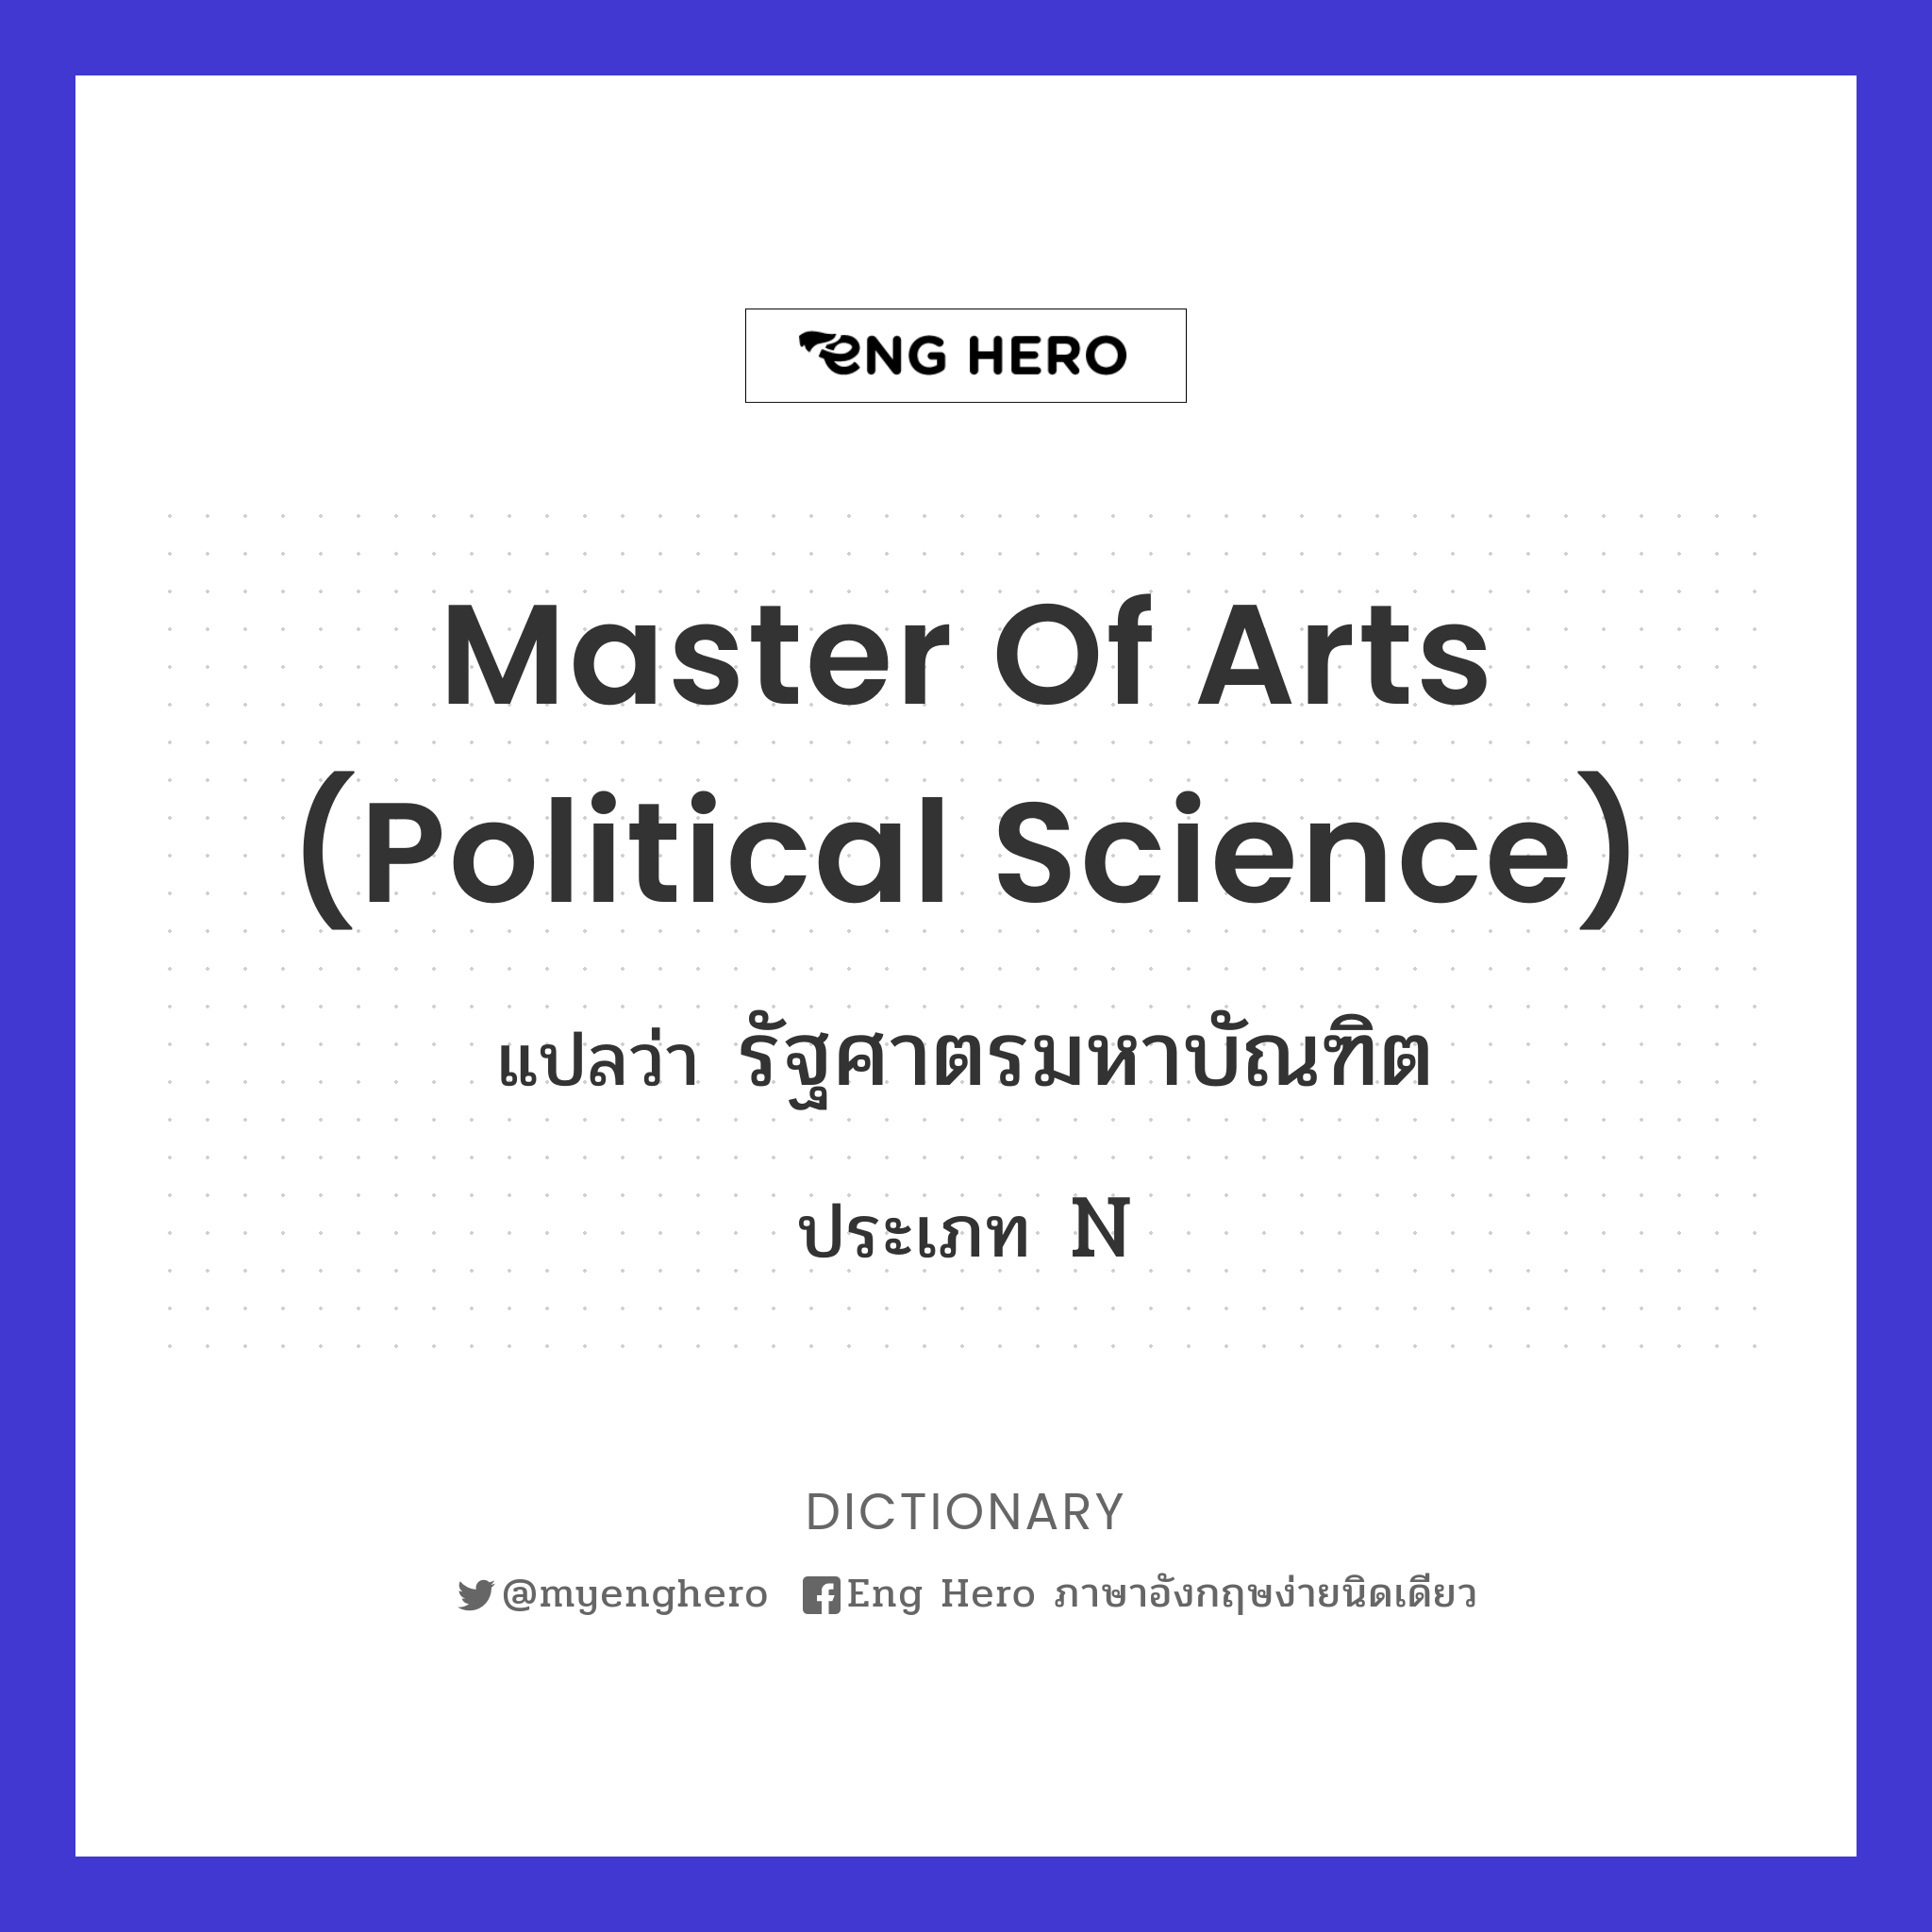 Master of Arts (Political Science)